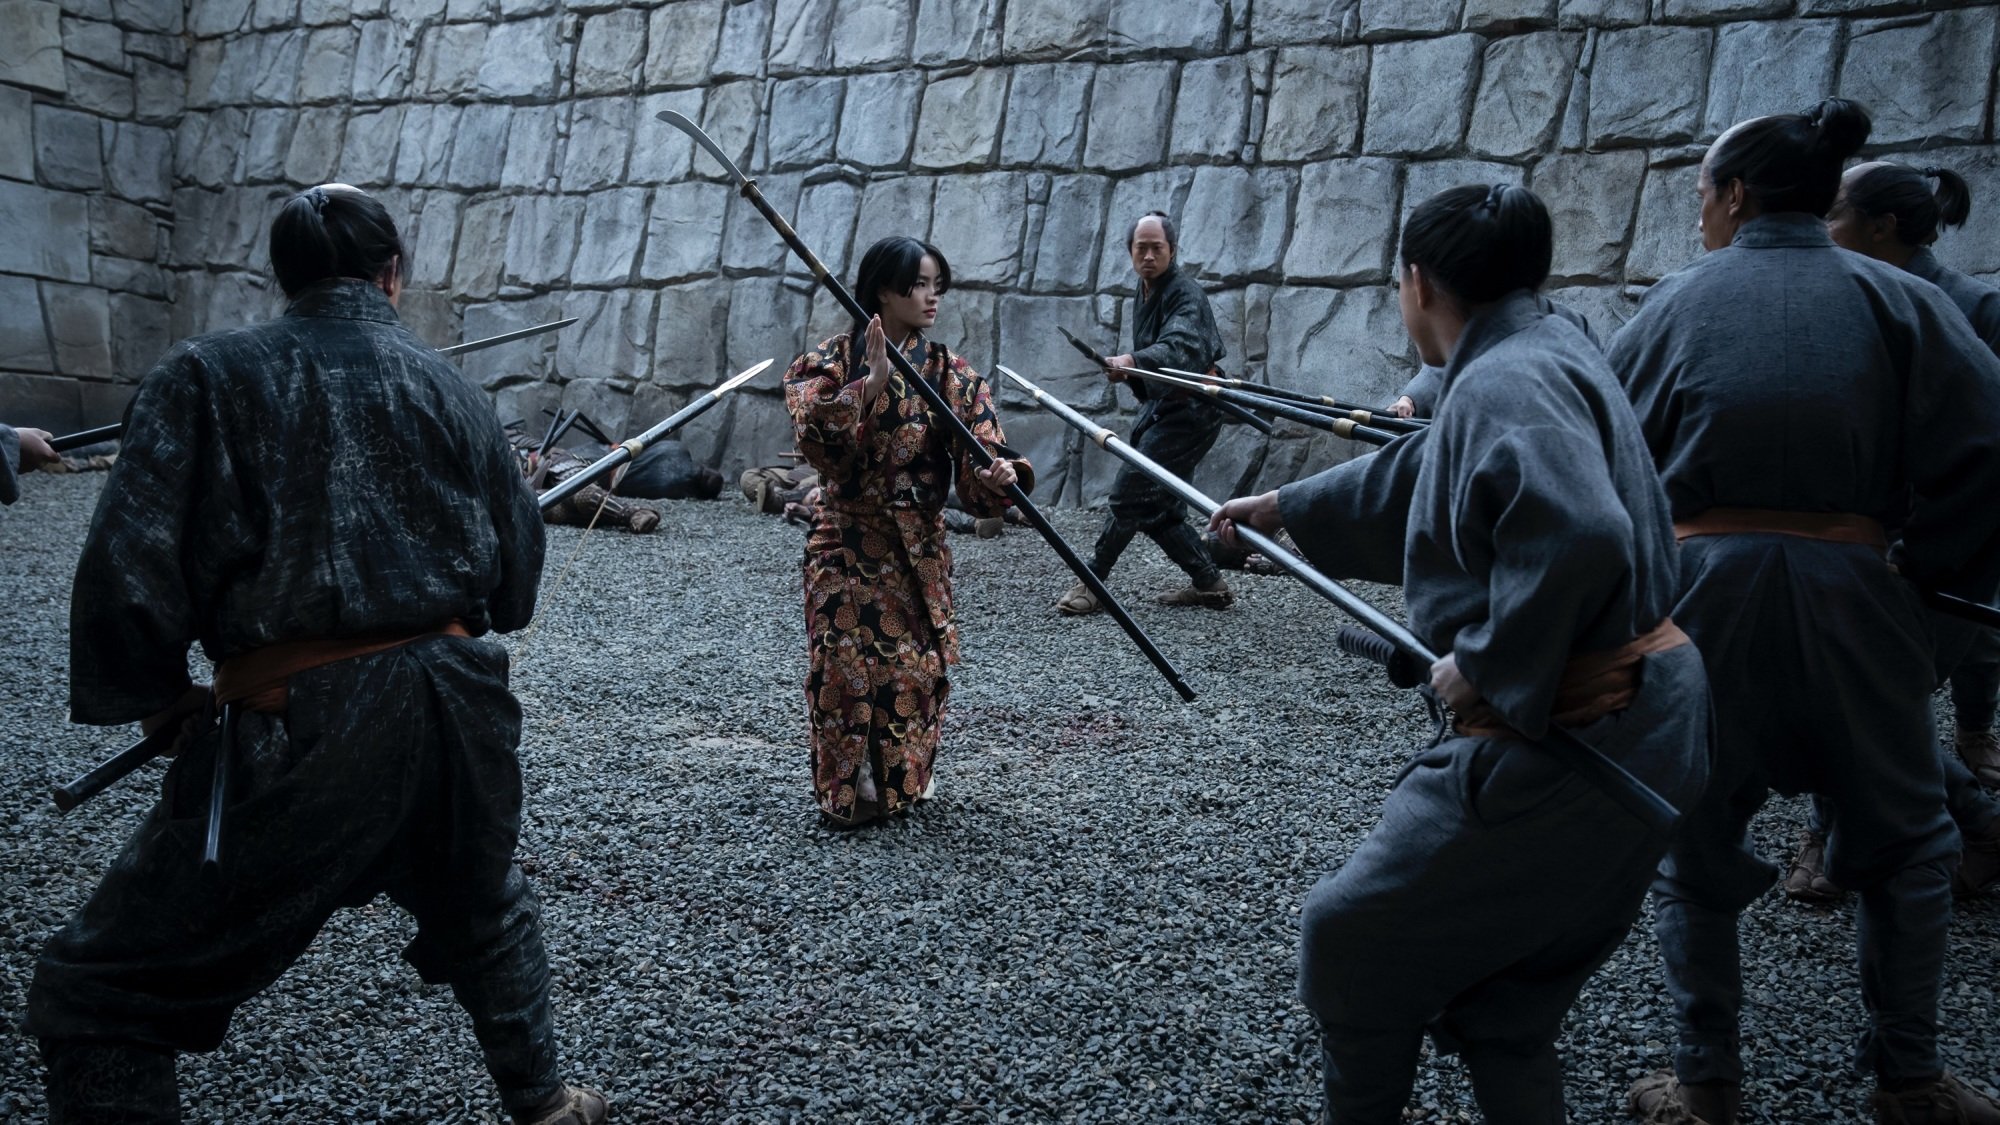 Mariko from "Shōgun" wields a staff while surrounded by soldiers.